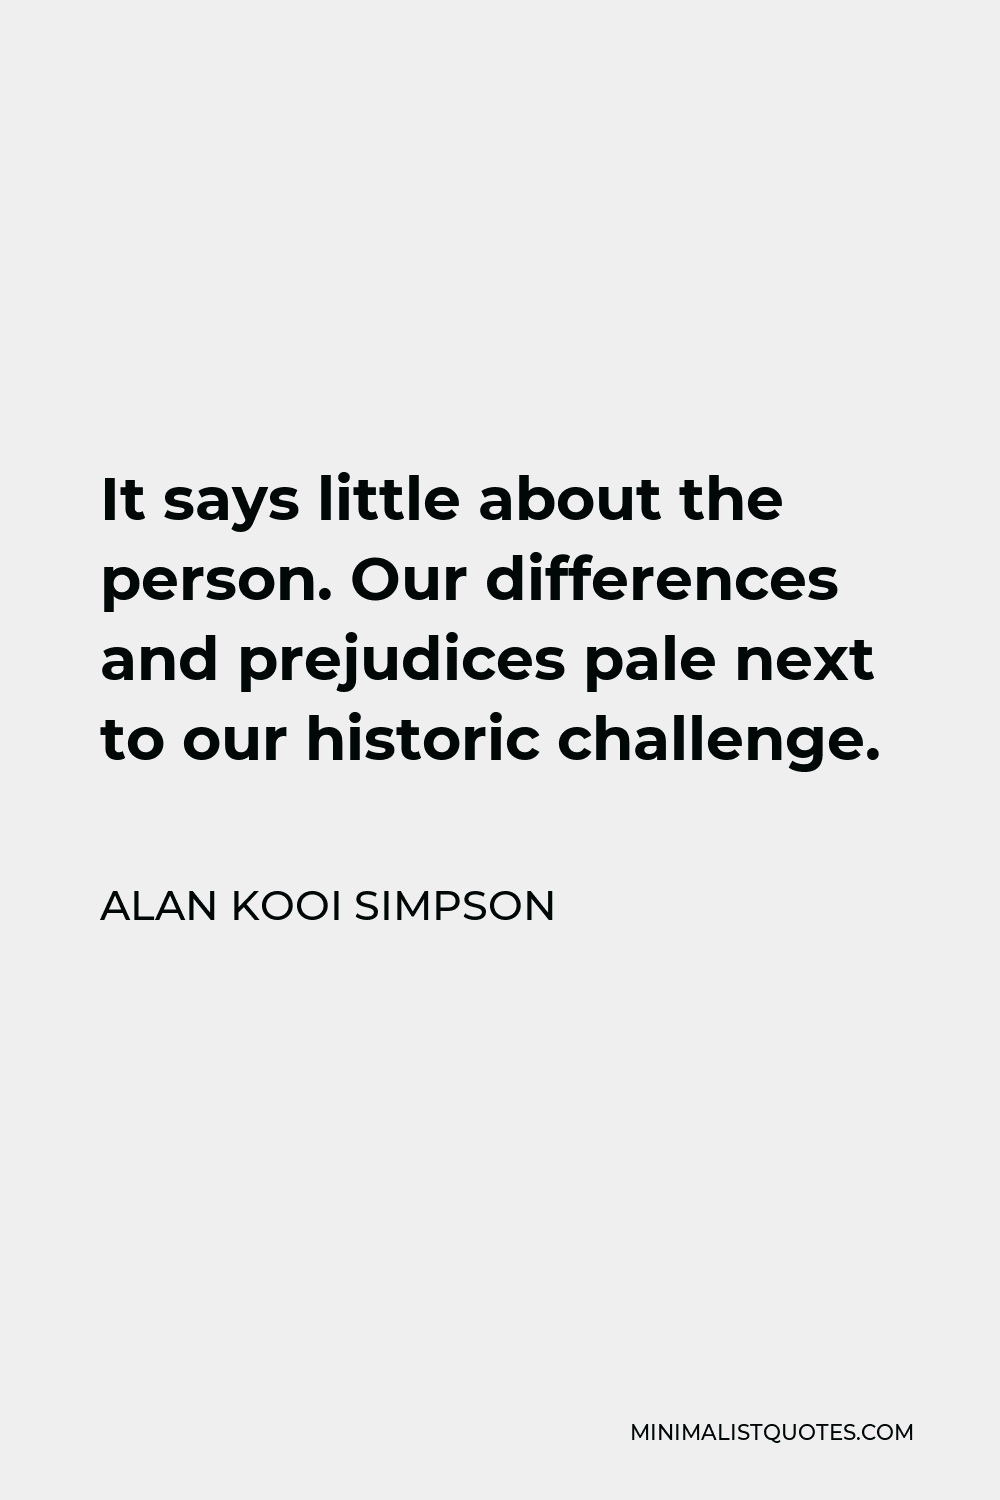 Alan Kooi Simpson Quote - It says little about the person. Our differences and prejudices pale next to our historic challenge.